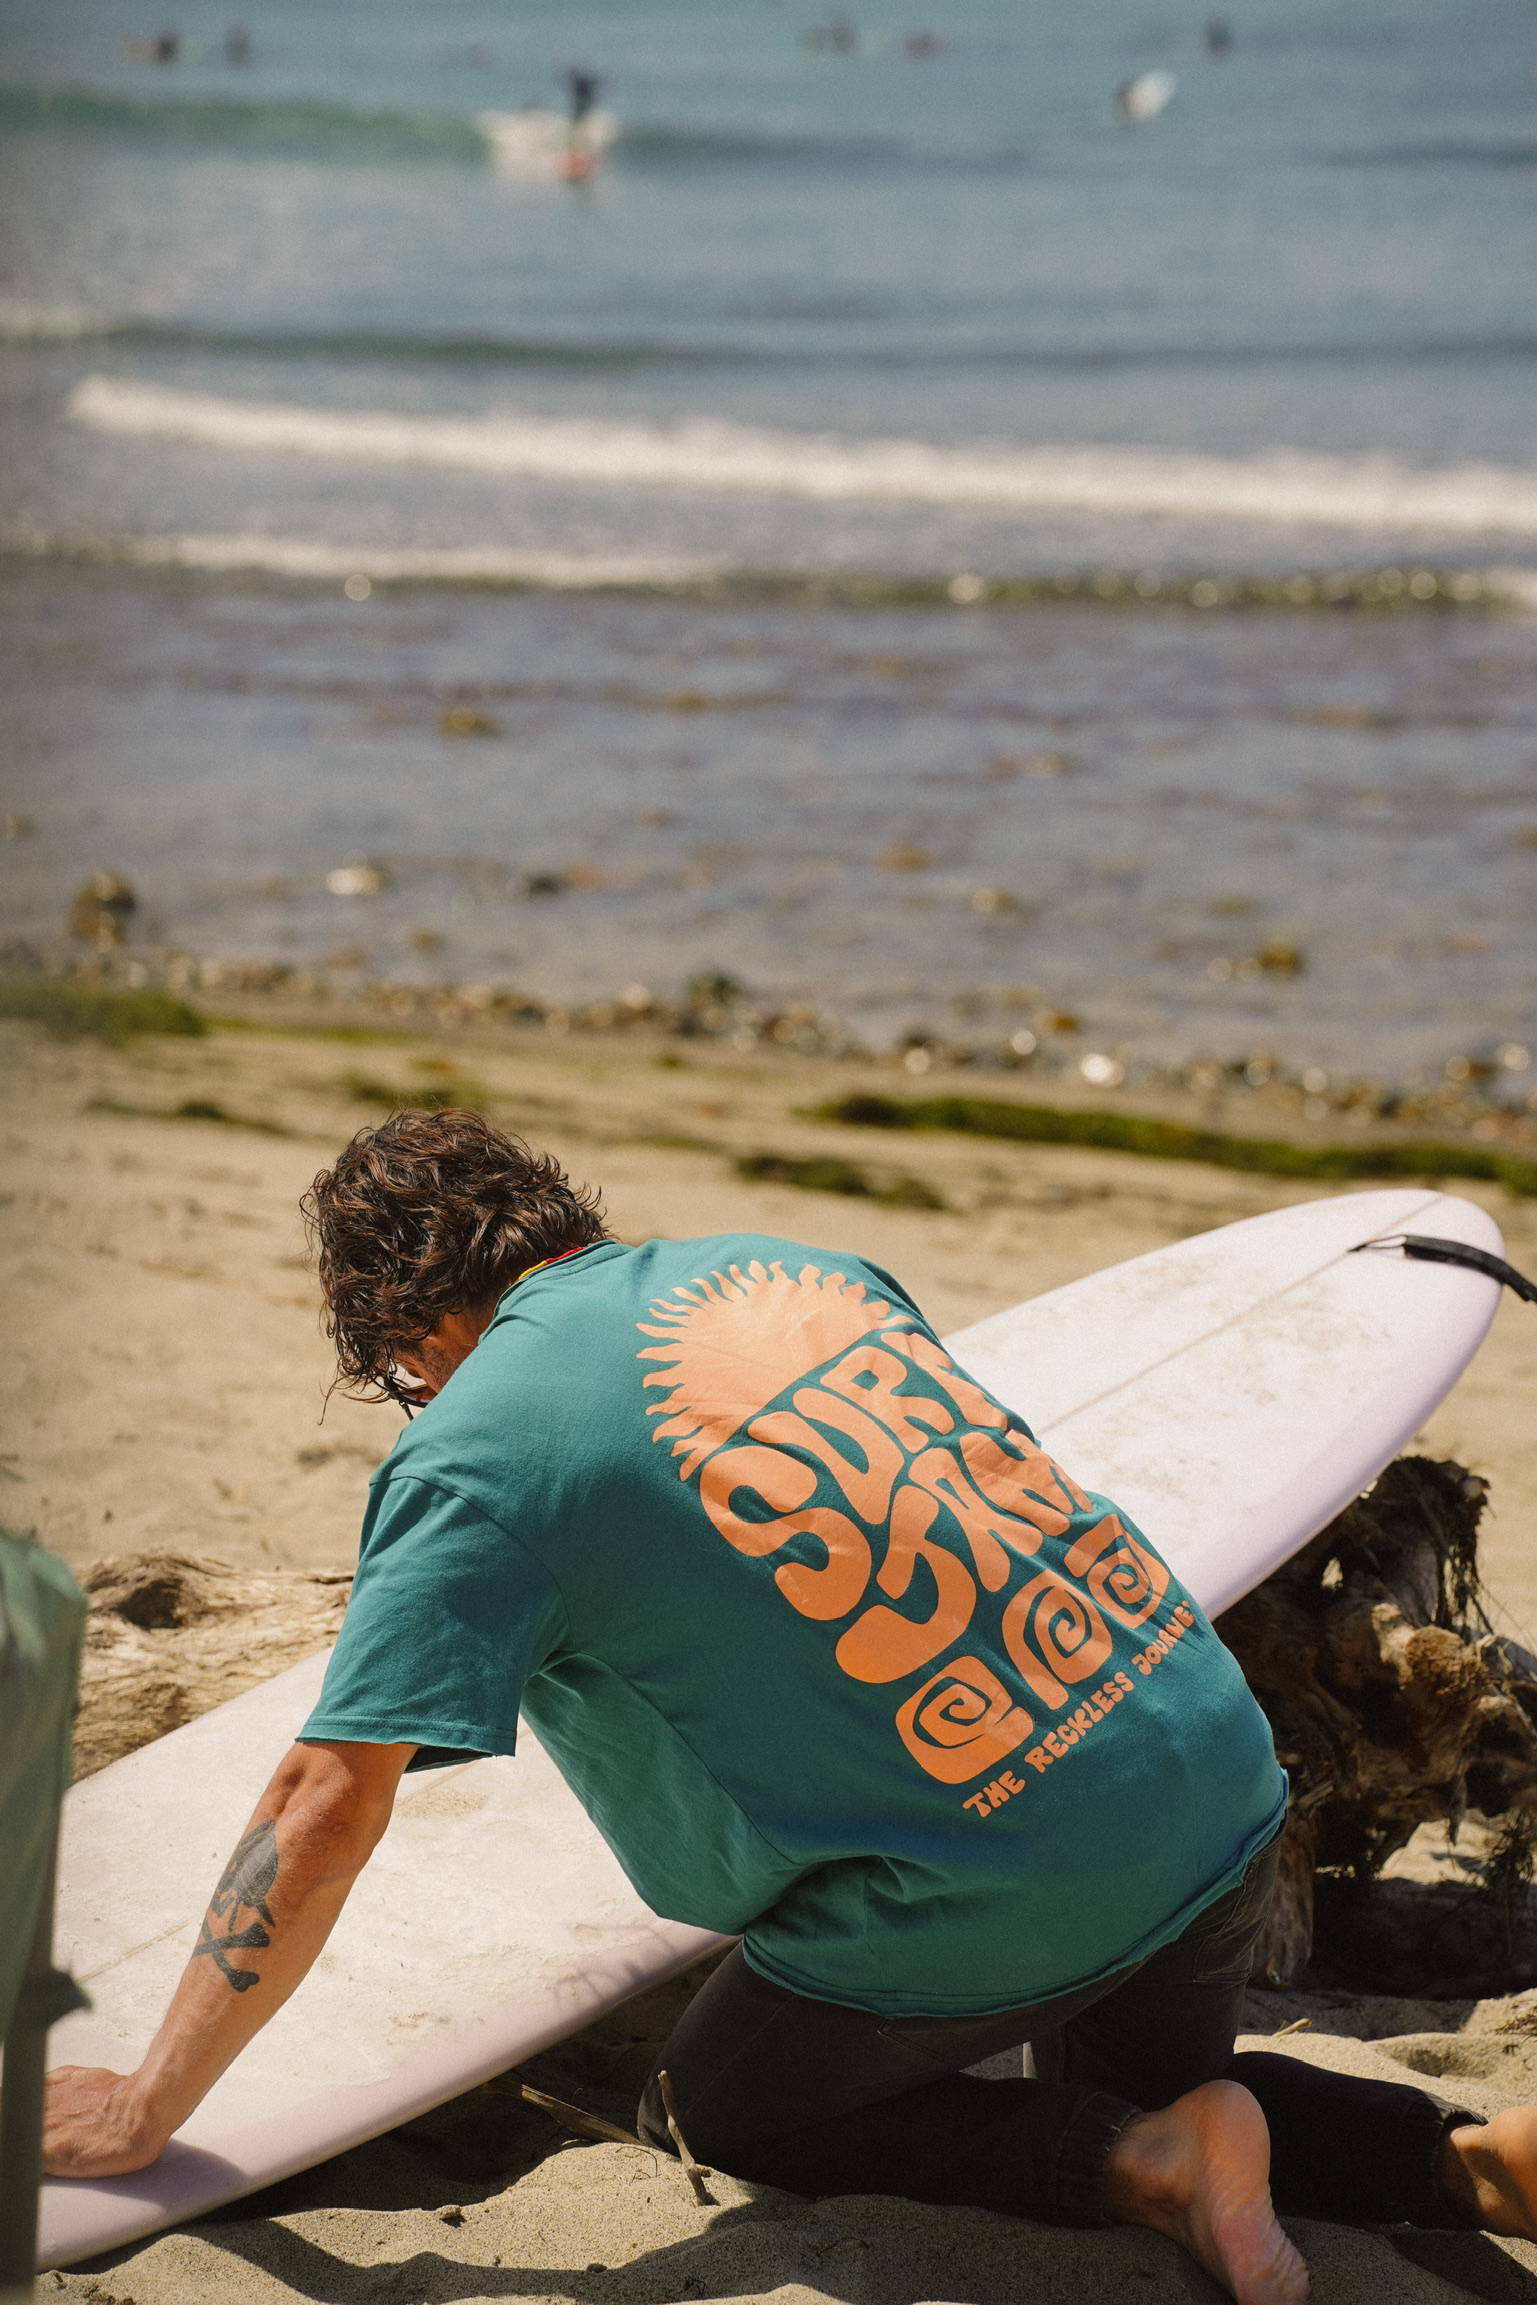 A man waxing his surfboard wearing a cool graphic t-shirt by the ocean.